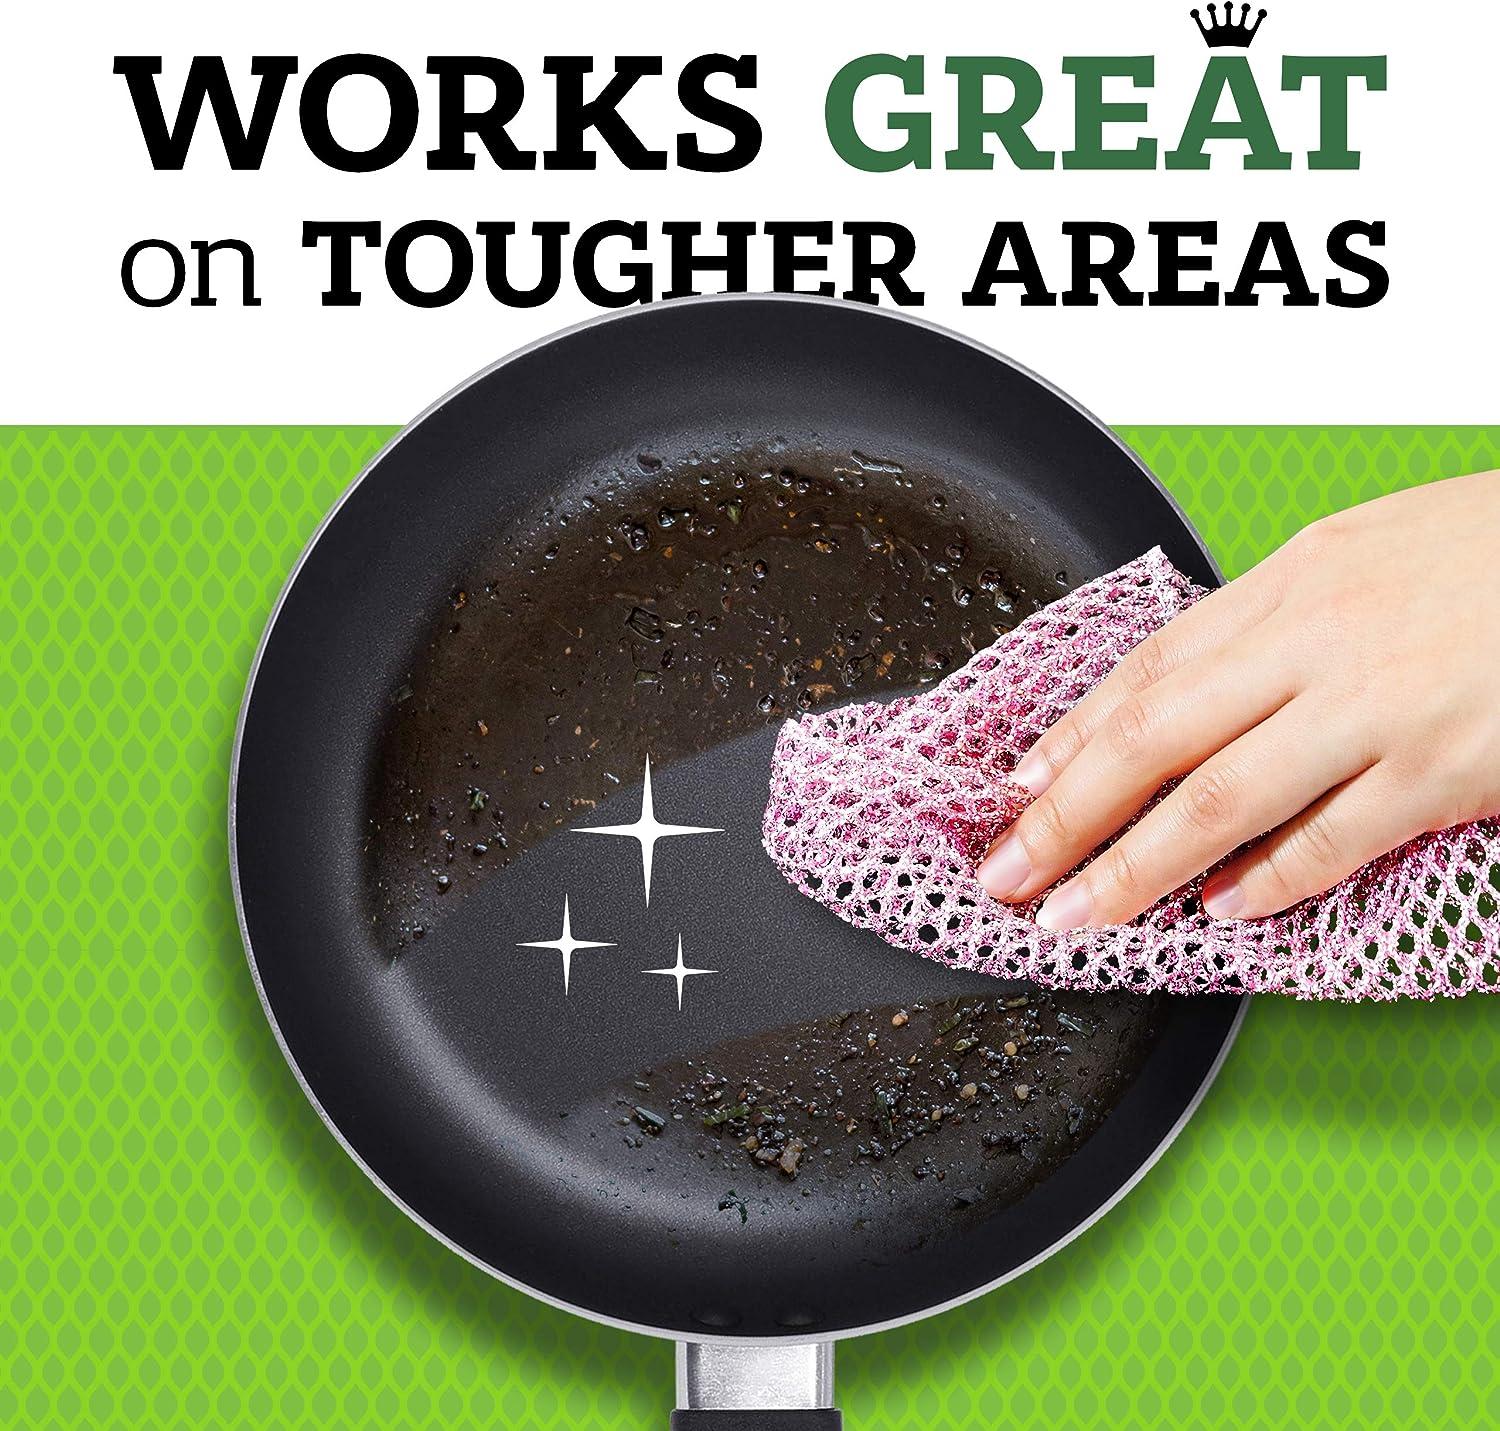 Mesh Dish Cloths Scrub Tough Stains, Without Scratching Cookware